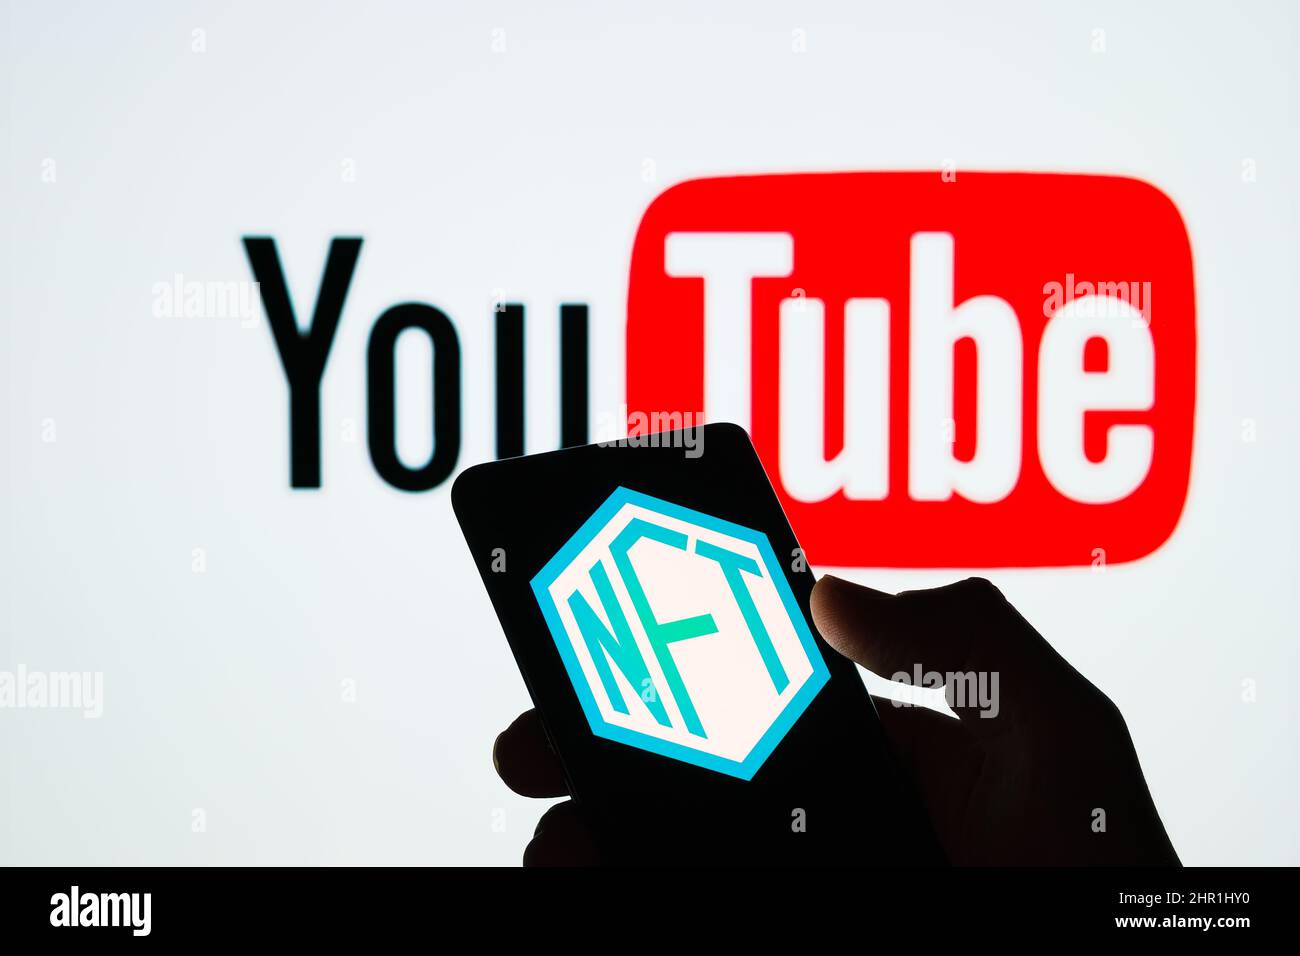 NFT logo seen on the screen of smartphone and blurred YouTube logo on the background. Selective focus. Stafford, United Kingdom, February 24, 2022 Stock Photo